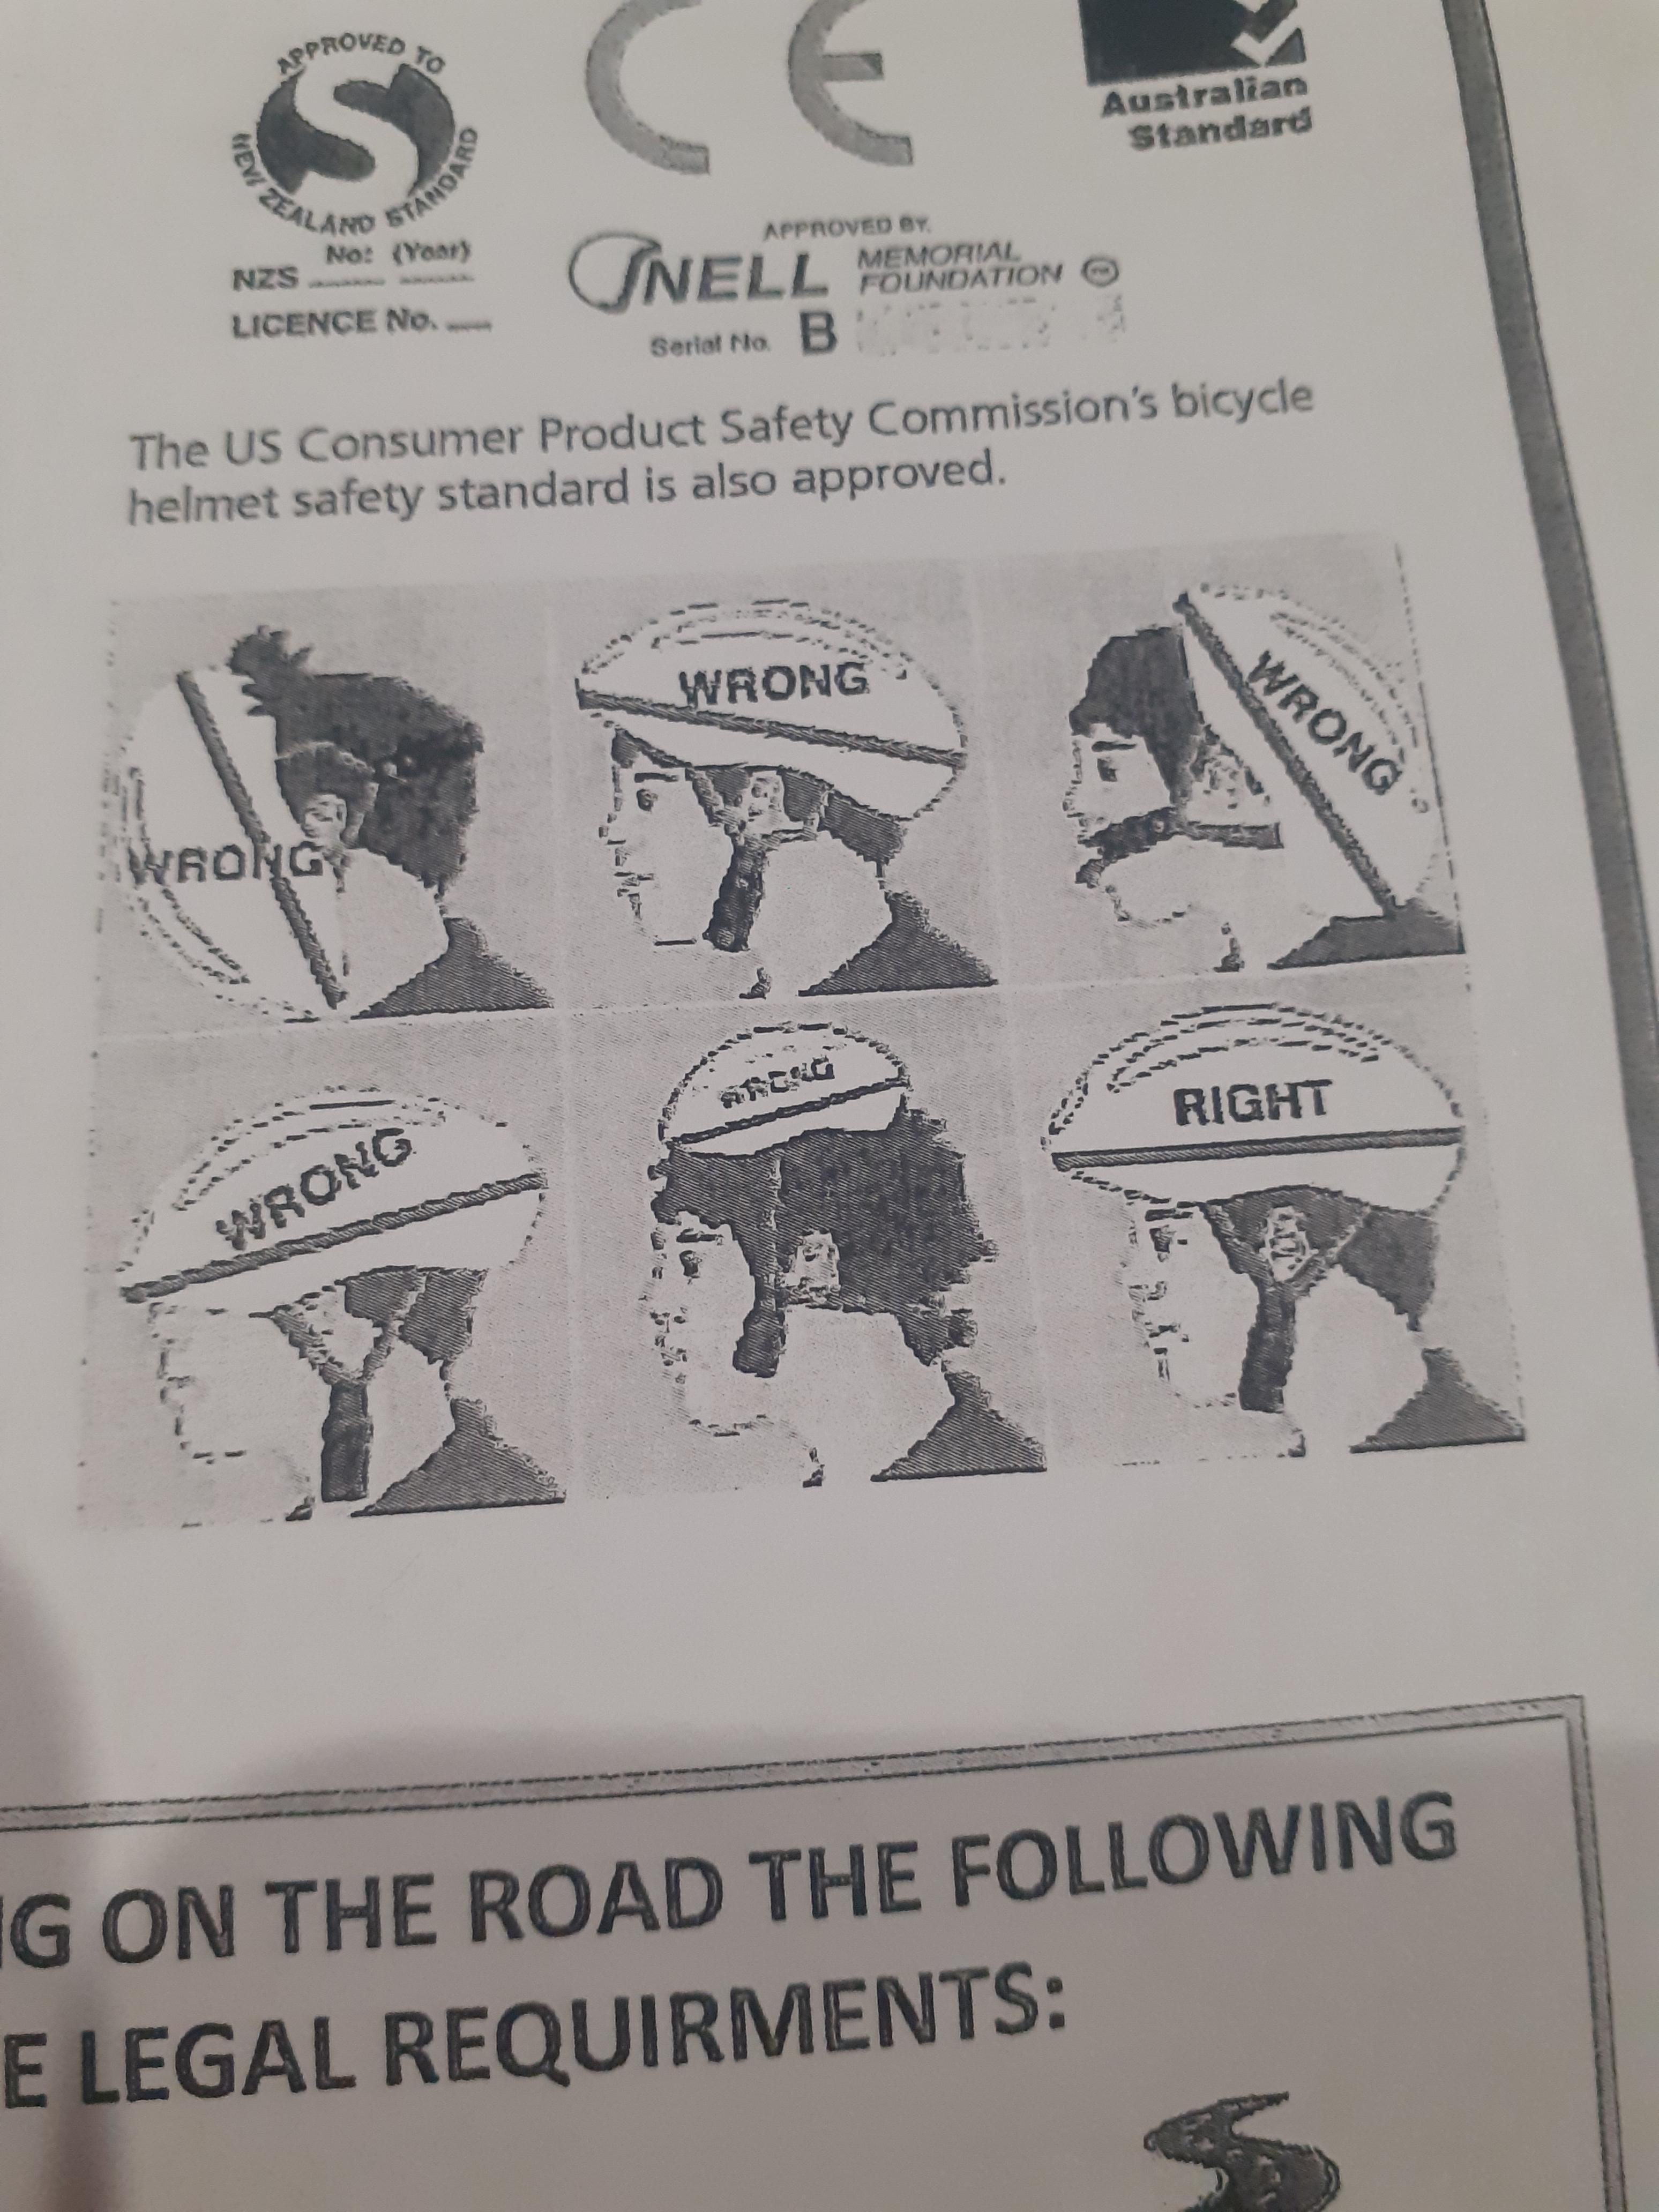 My son's school sent him home with a guide on how to properly operate a cycle helmet